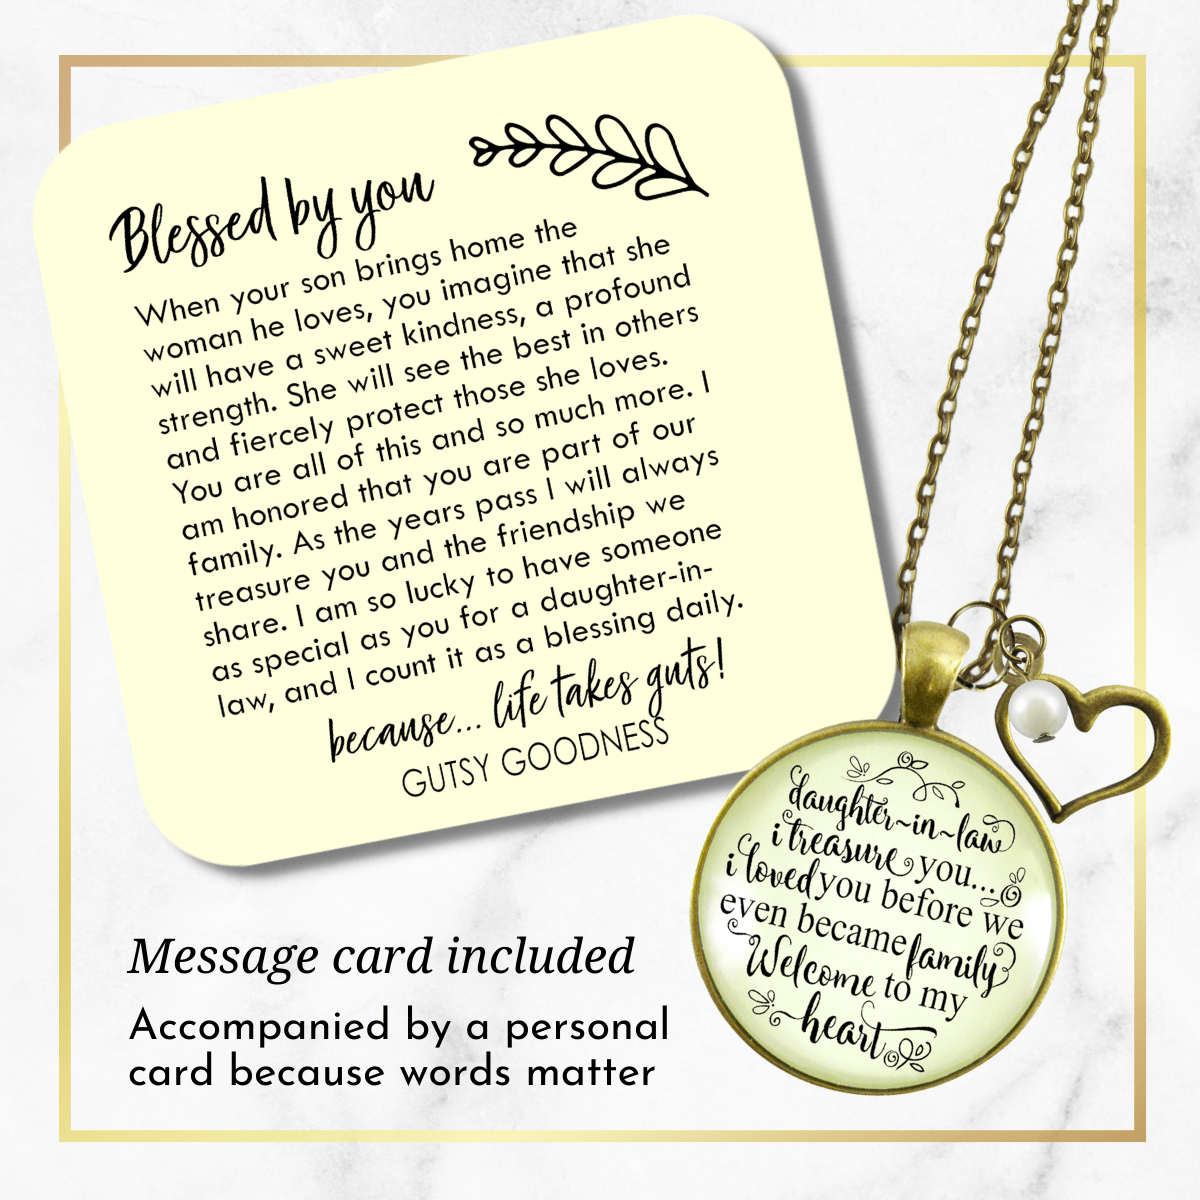 Gutsy Goodness Daughter in Law Necklace Treasure You Love Family Meaningful Jewelry - Gutsy Goodness;Daughter In Law Necklace Treasure You Love Family Meaningful Jewelry - Gutsy Goodness Handmade Jewelry Gifts